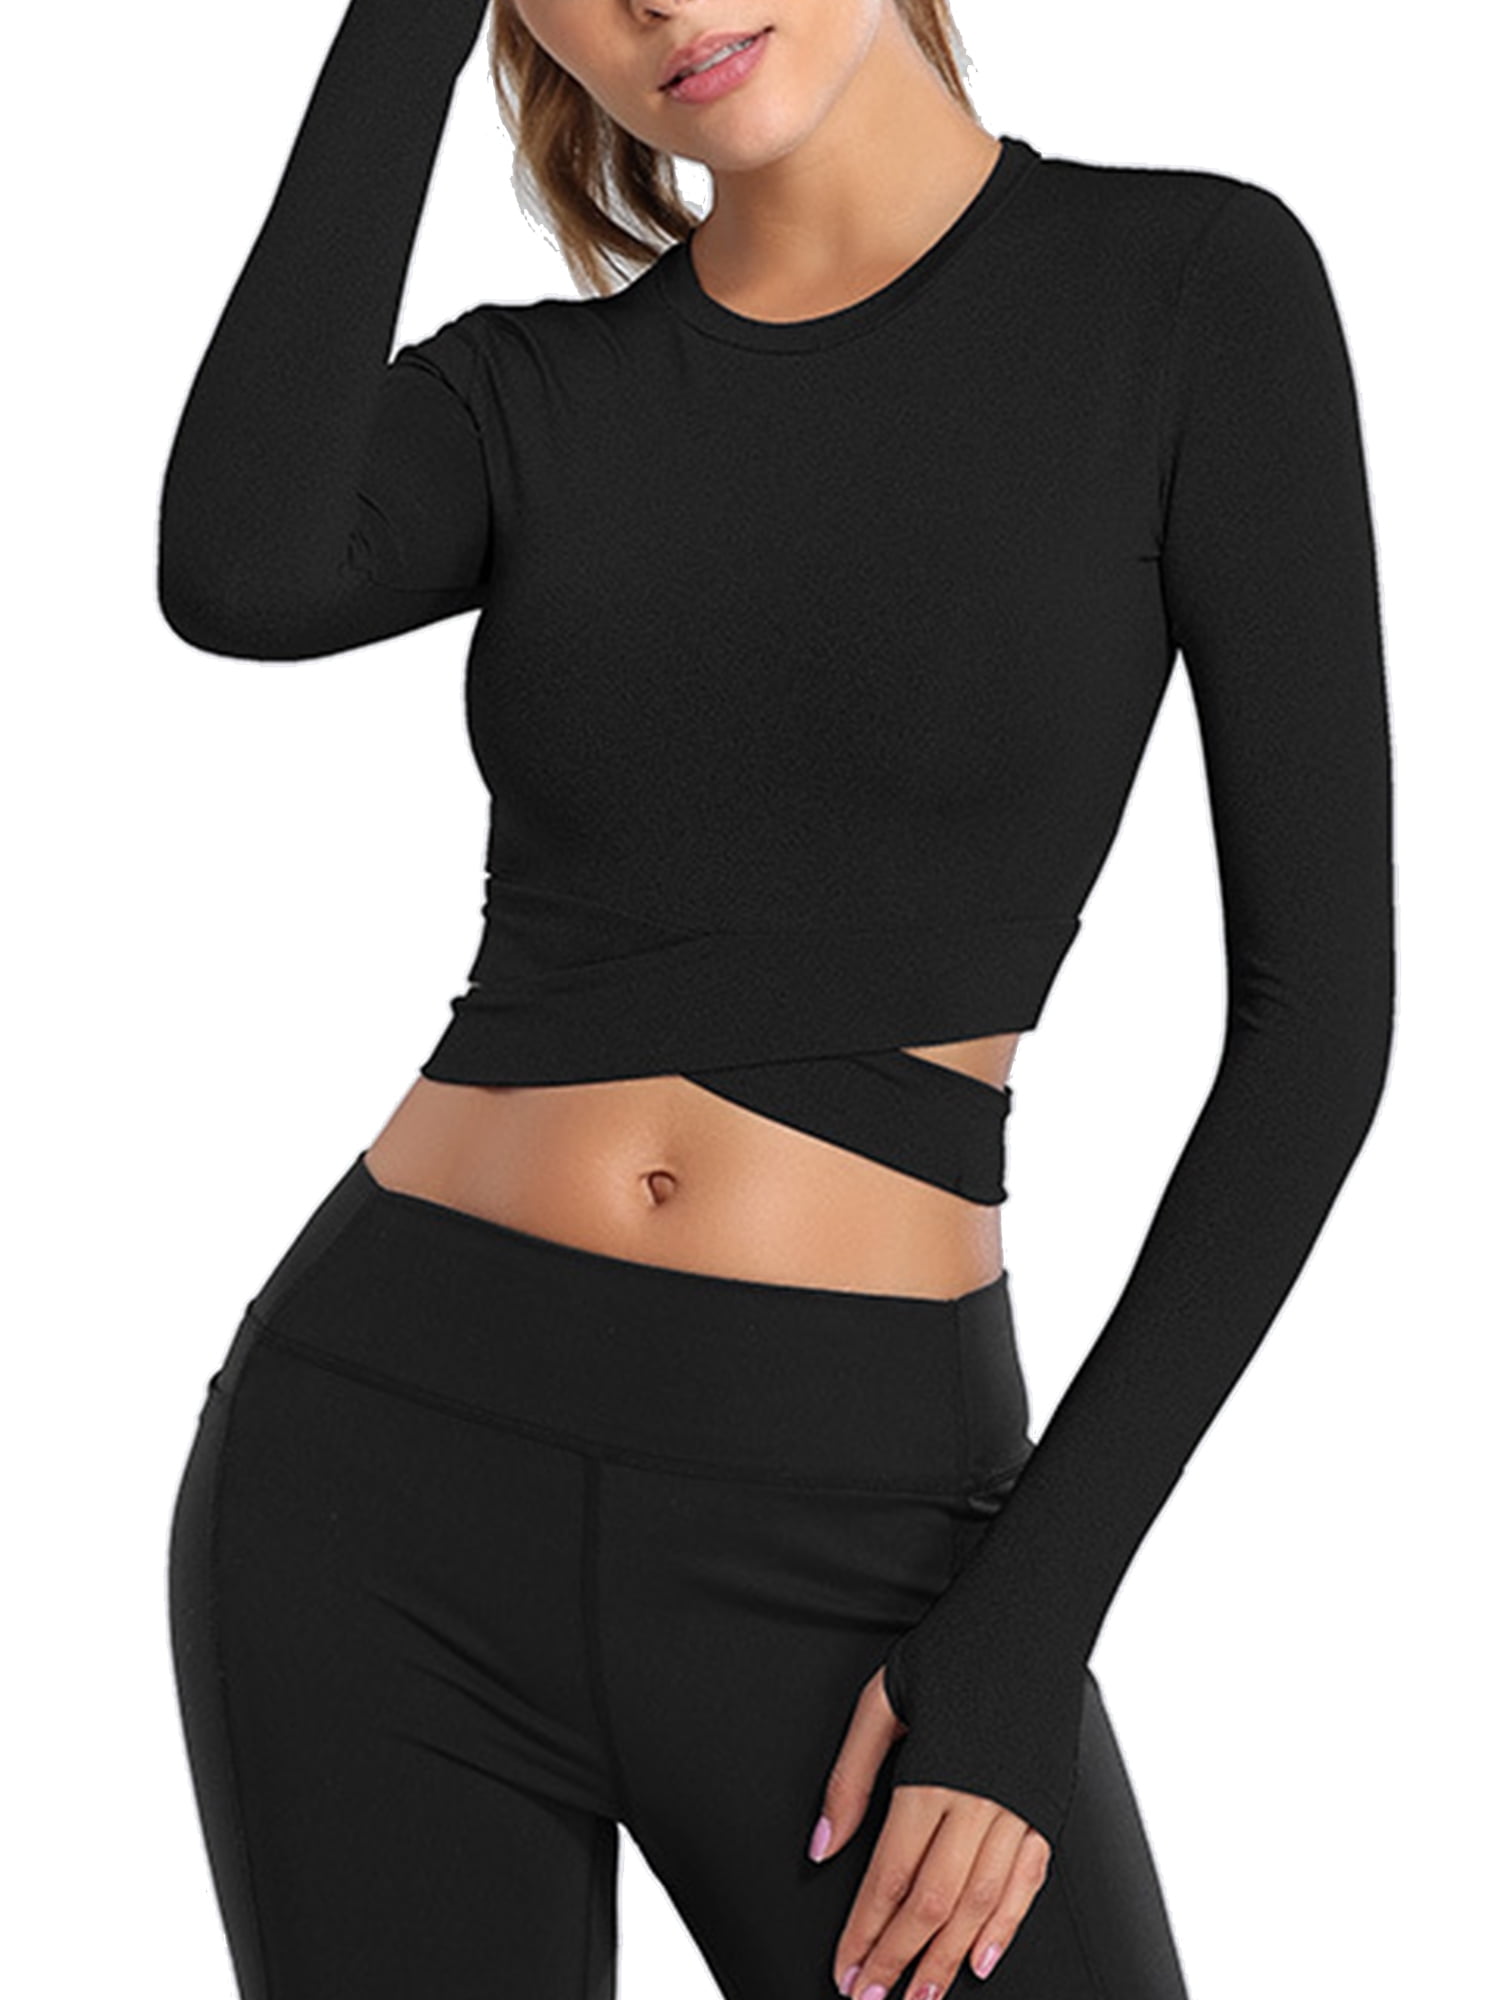 Sexy Dance Women's Workout Shirts Crop Top Workout Gym Exercise